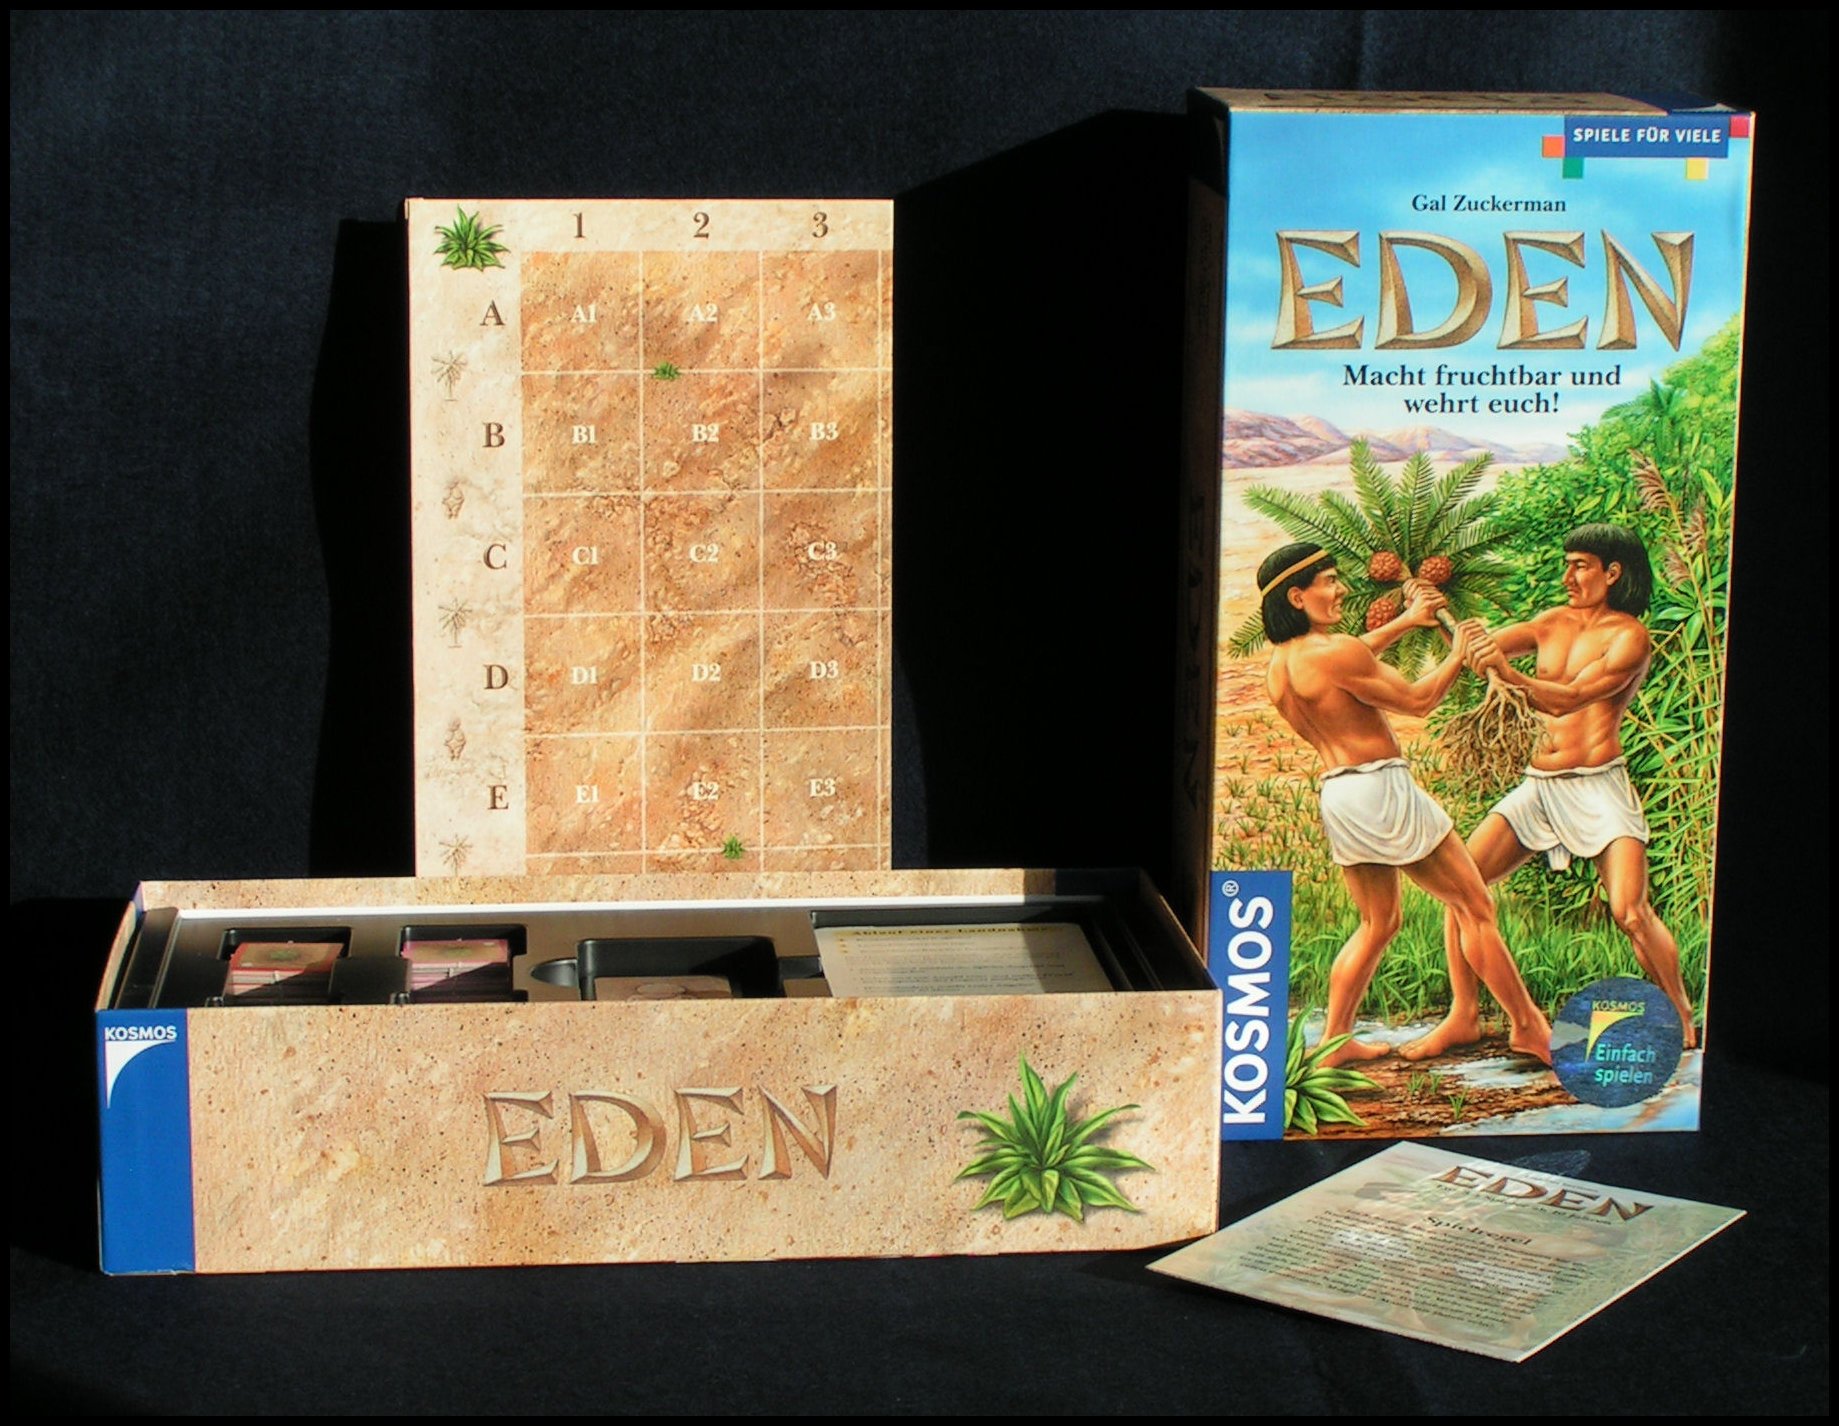 Eden - Opening The Box